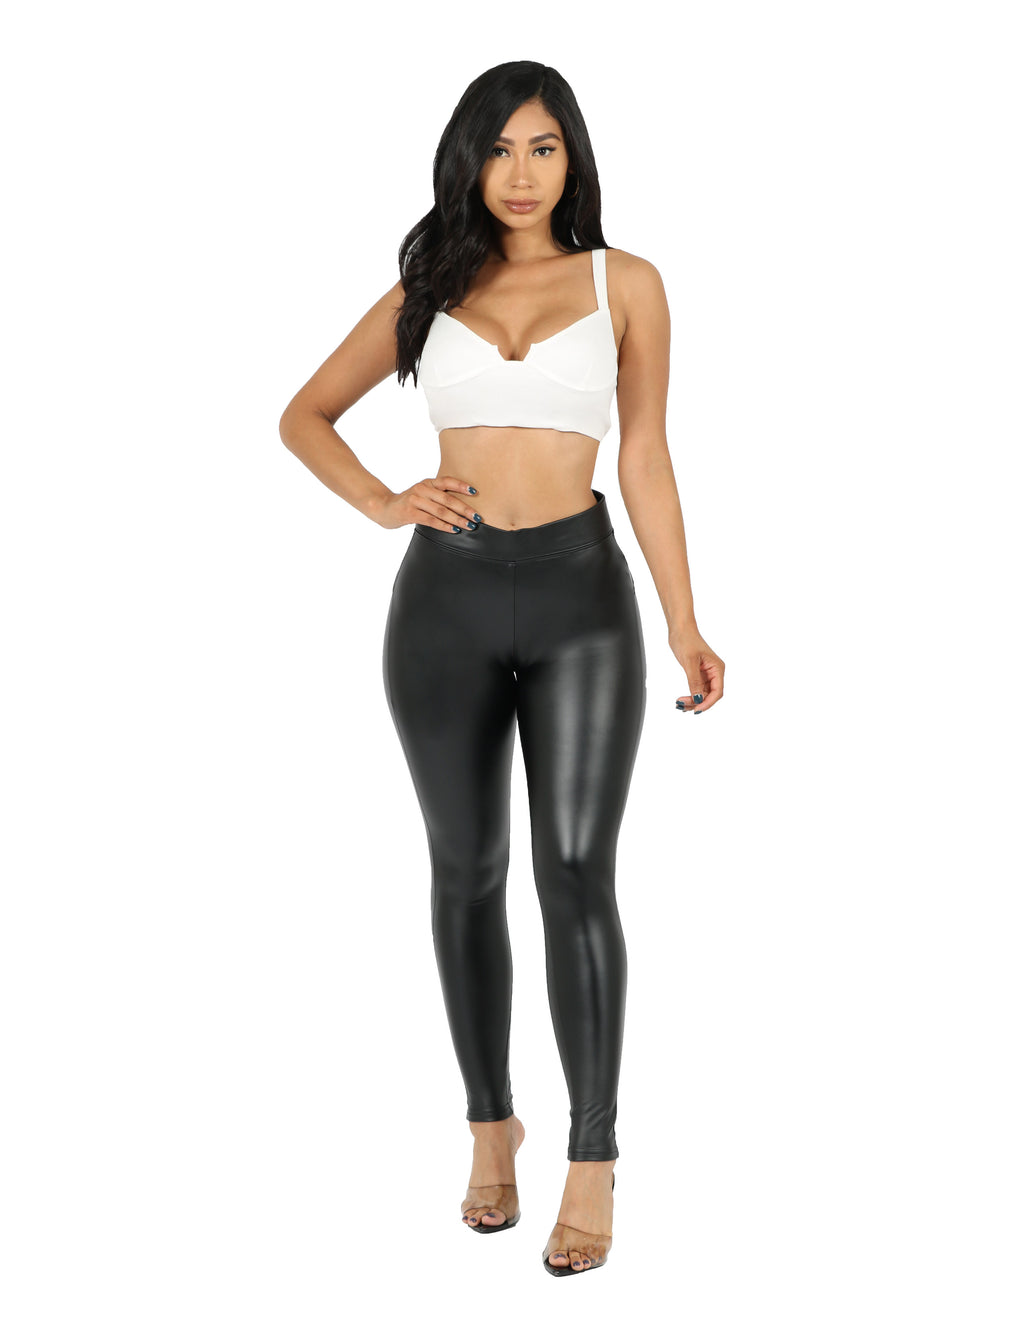 Classy Bar: Dulce Candy - Socialbliss  Outfits with leggings, Dresses with  leggings, Dressy leggings